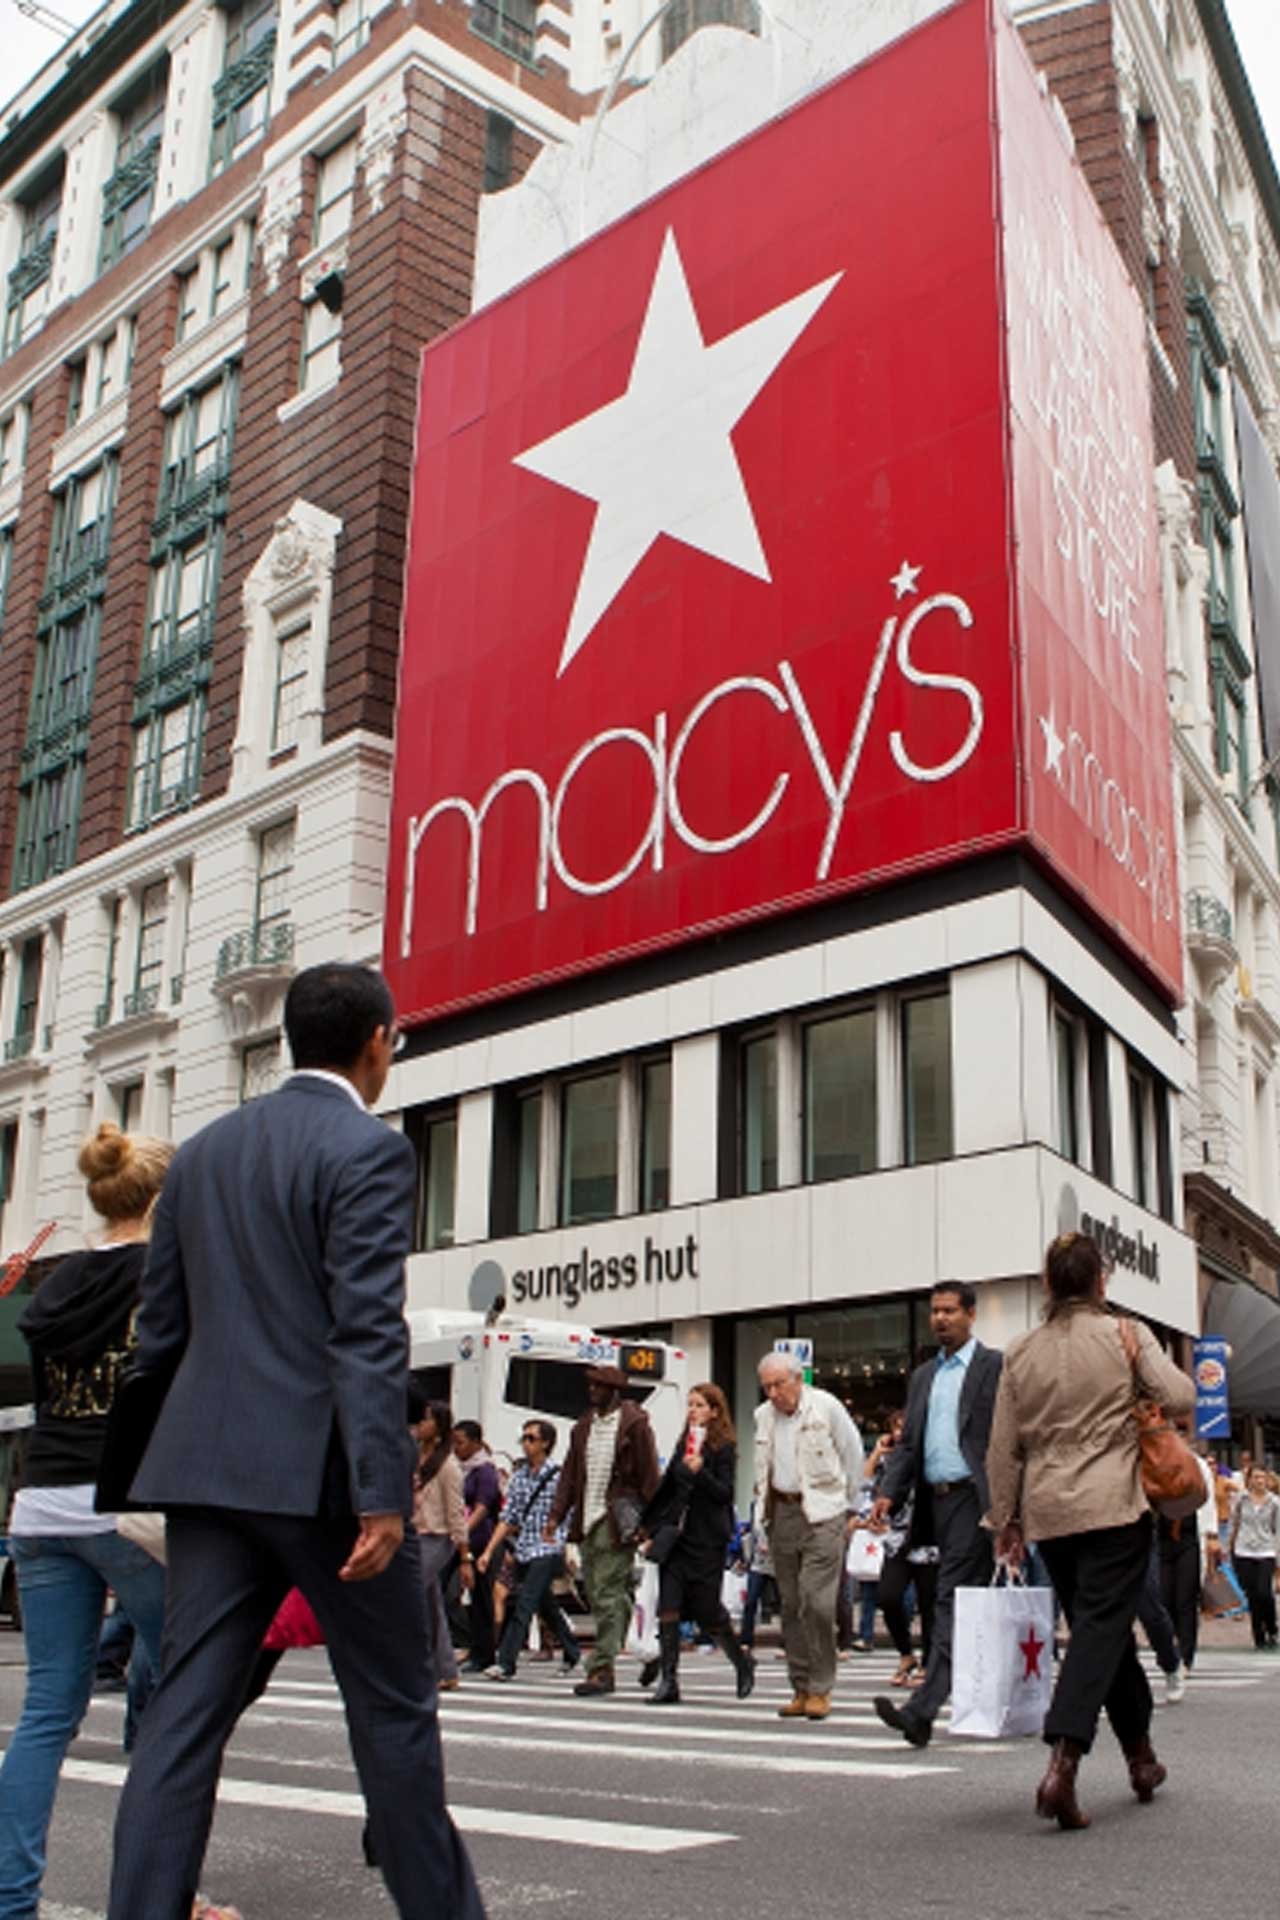 Macy's Gift with Purchase Program